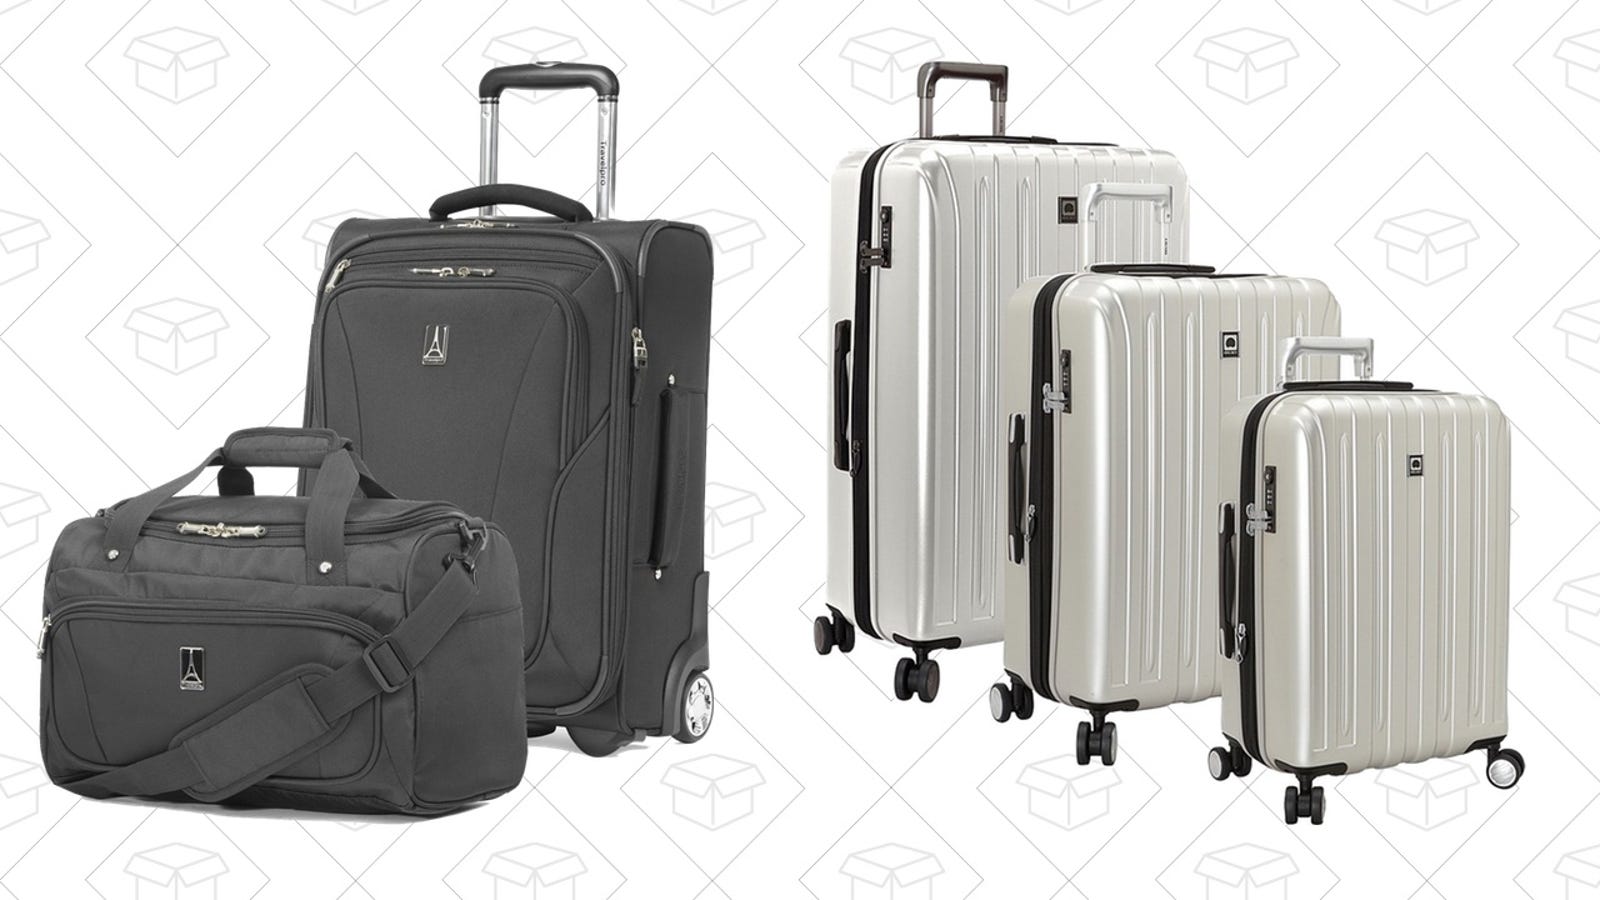 Every Piece of Luggage You Could Possibly Need is On Sale Right Now